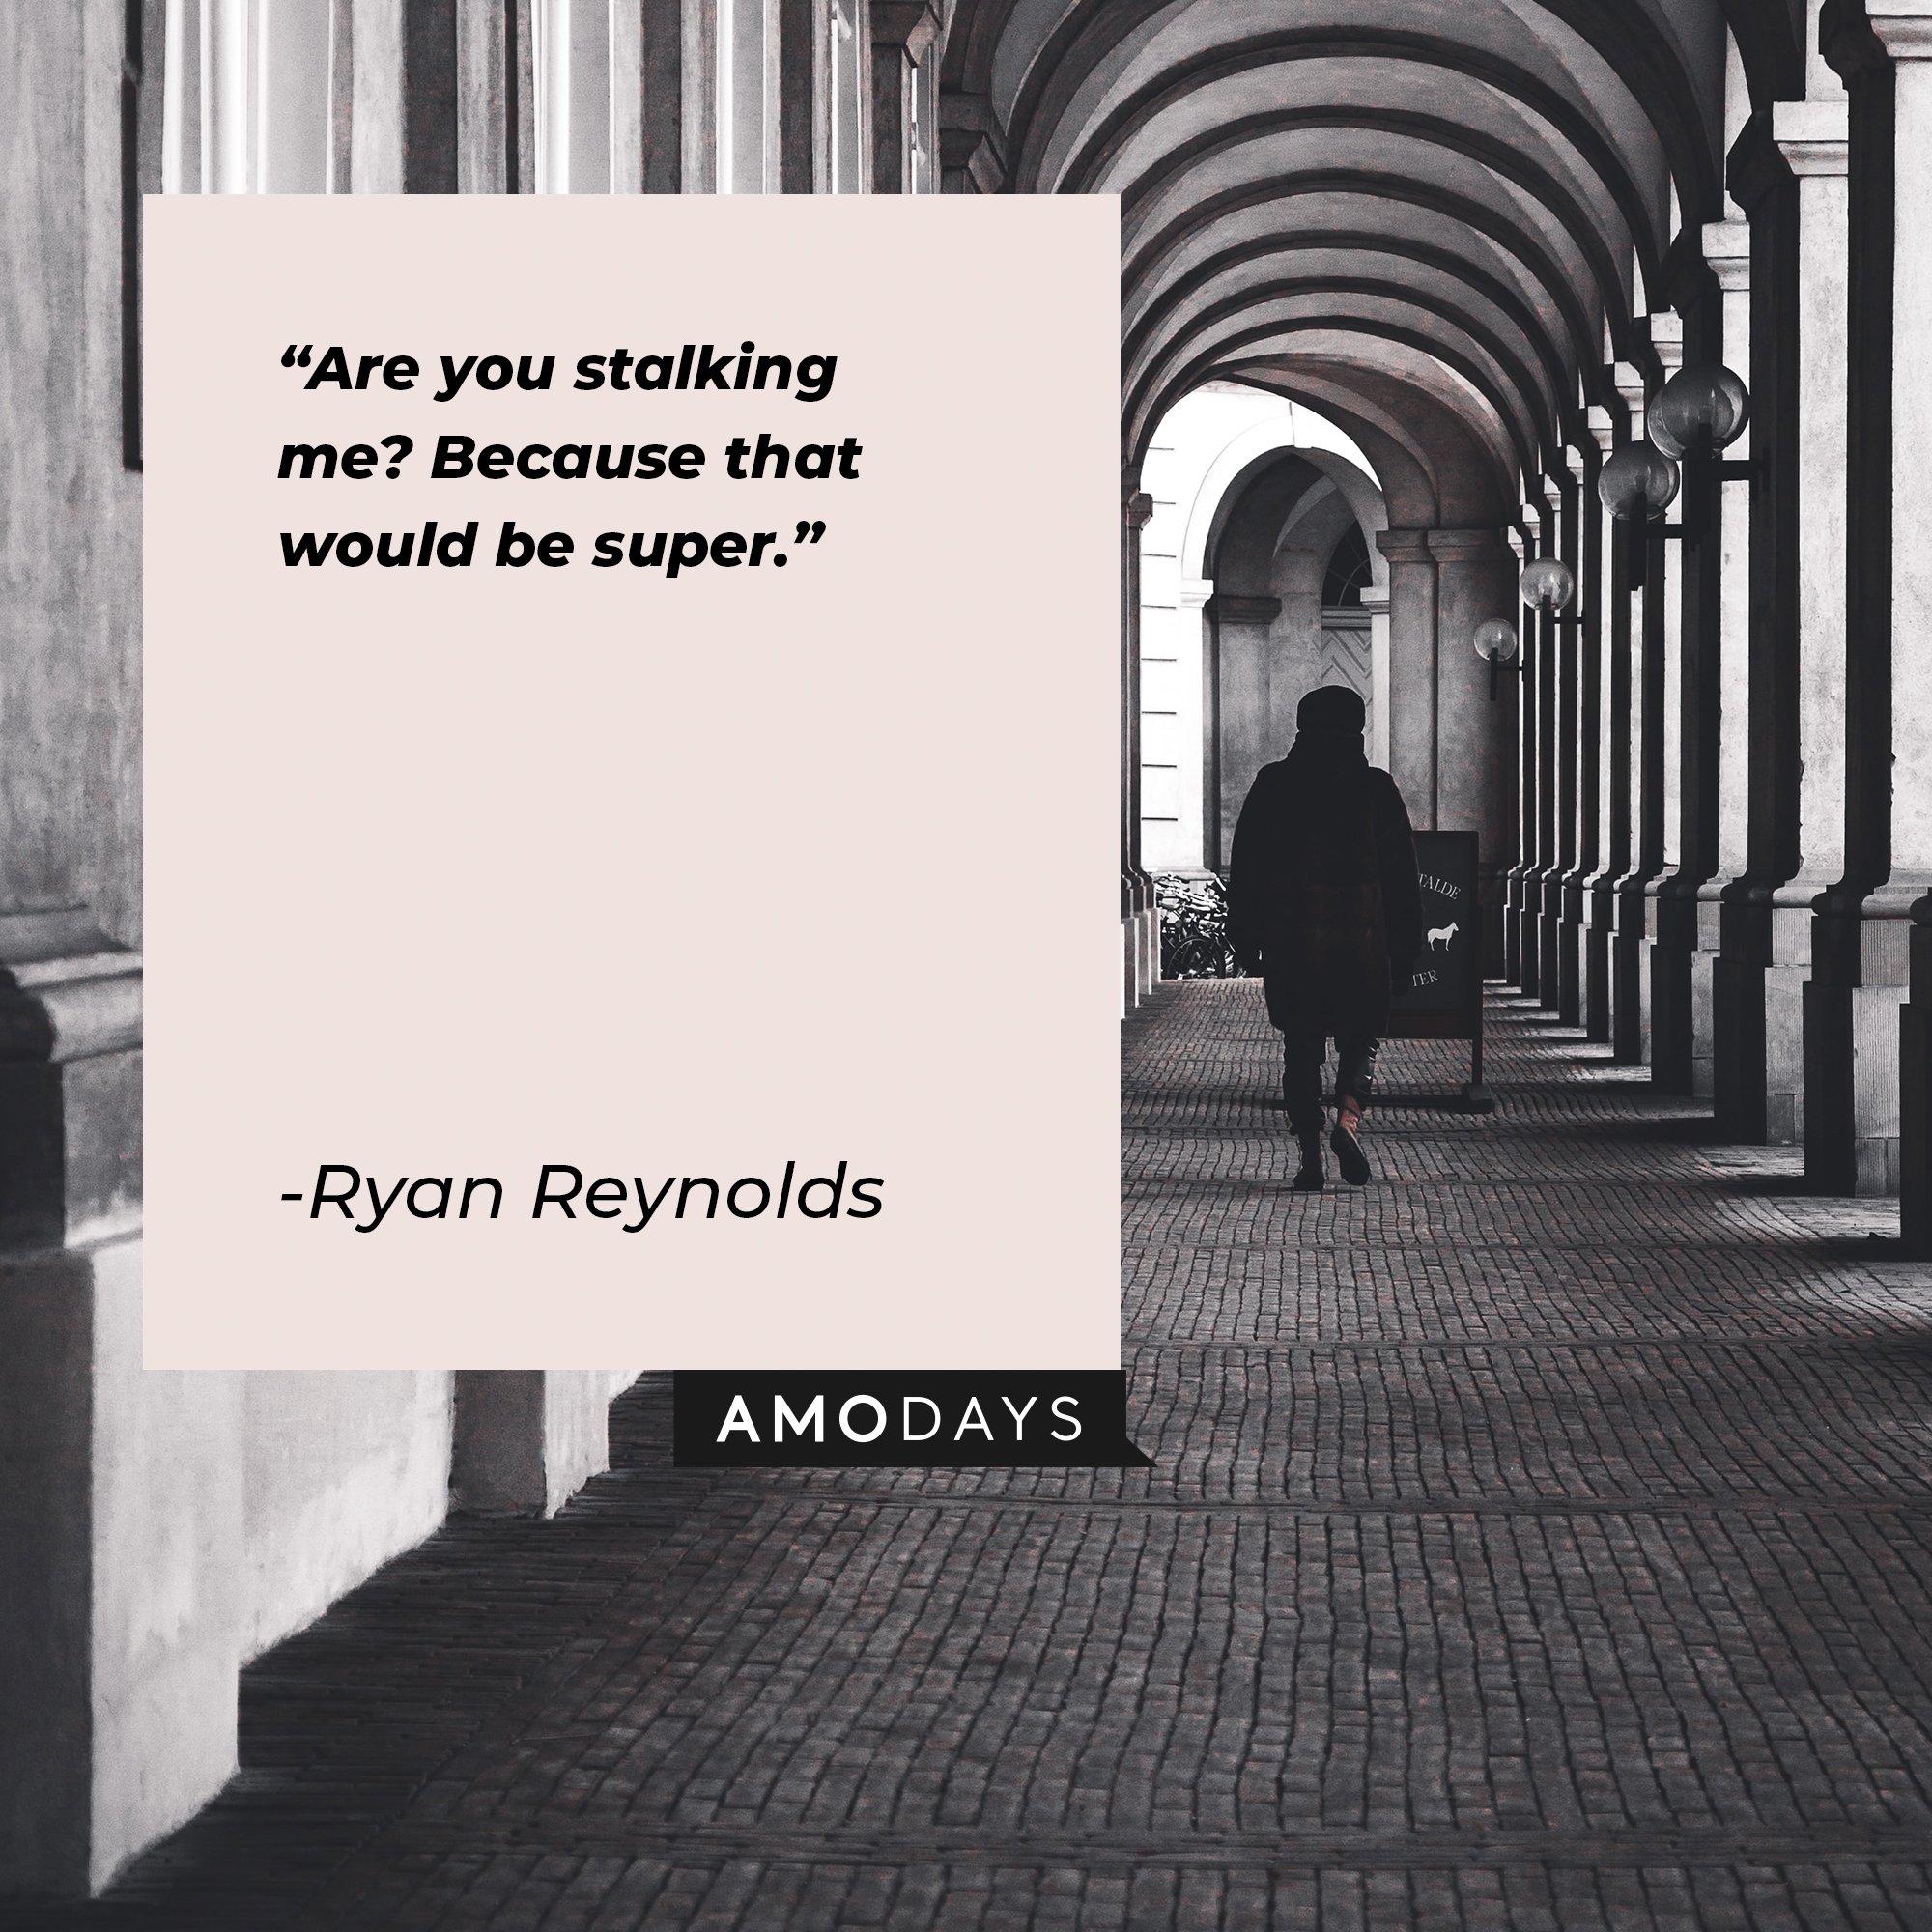 Ryan Reynolds’s quote: "Are you stalking me? Because that would be super." | Image: AmoDays   